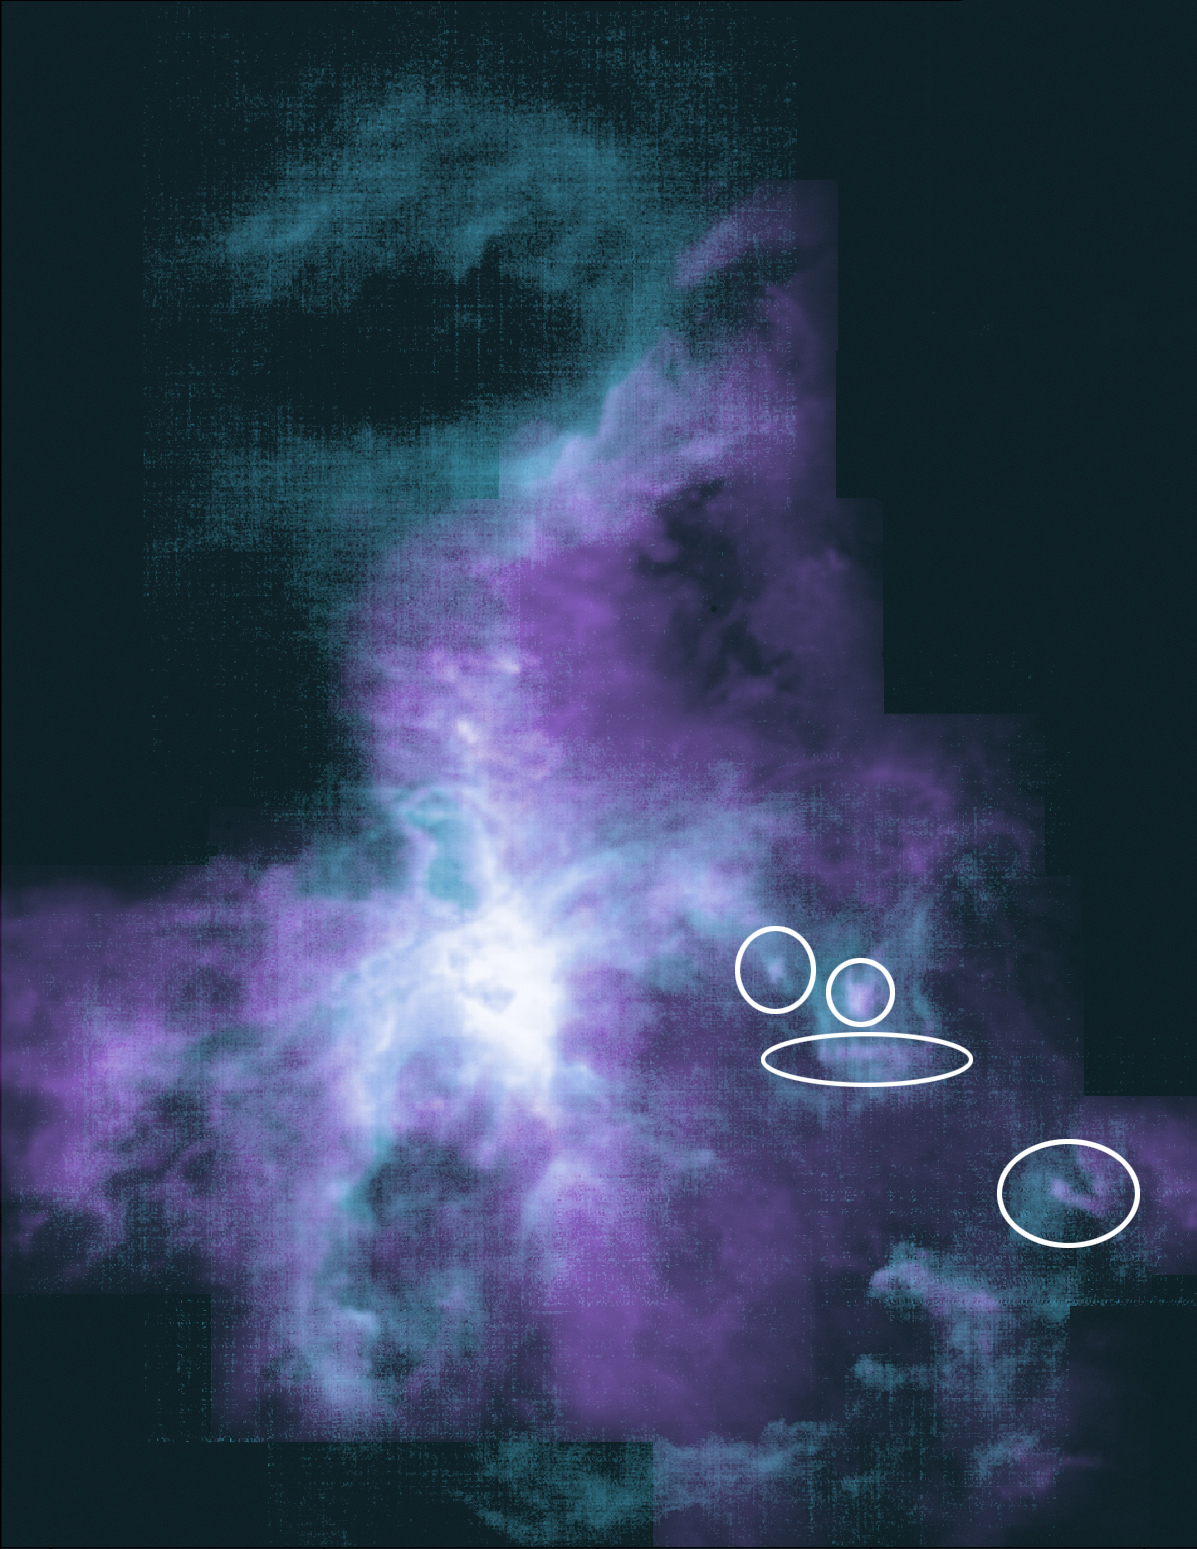 Blue and purple image of Orion with annotated circles around clouds.